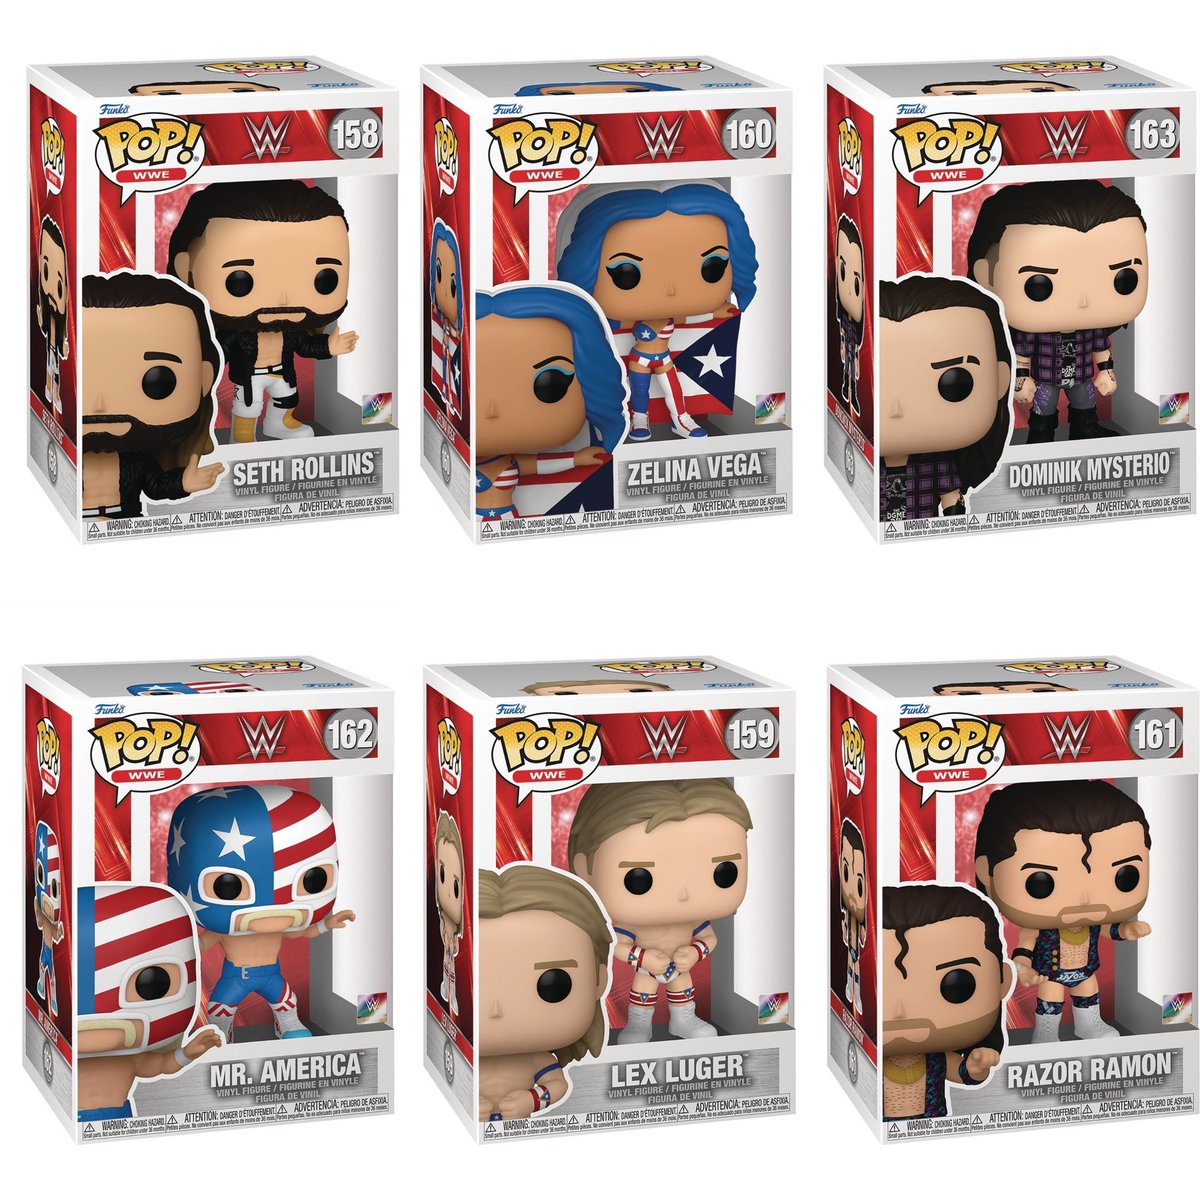 First look at WWE Funko Pops! #wwe